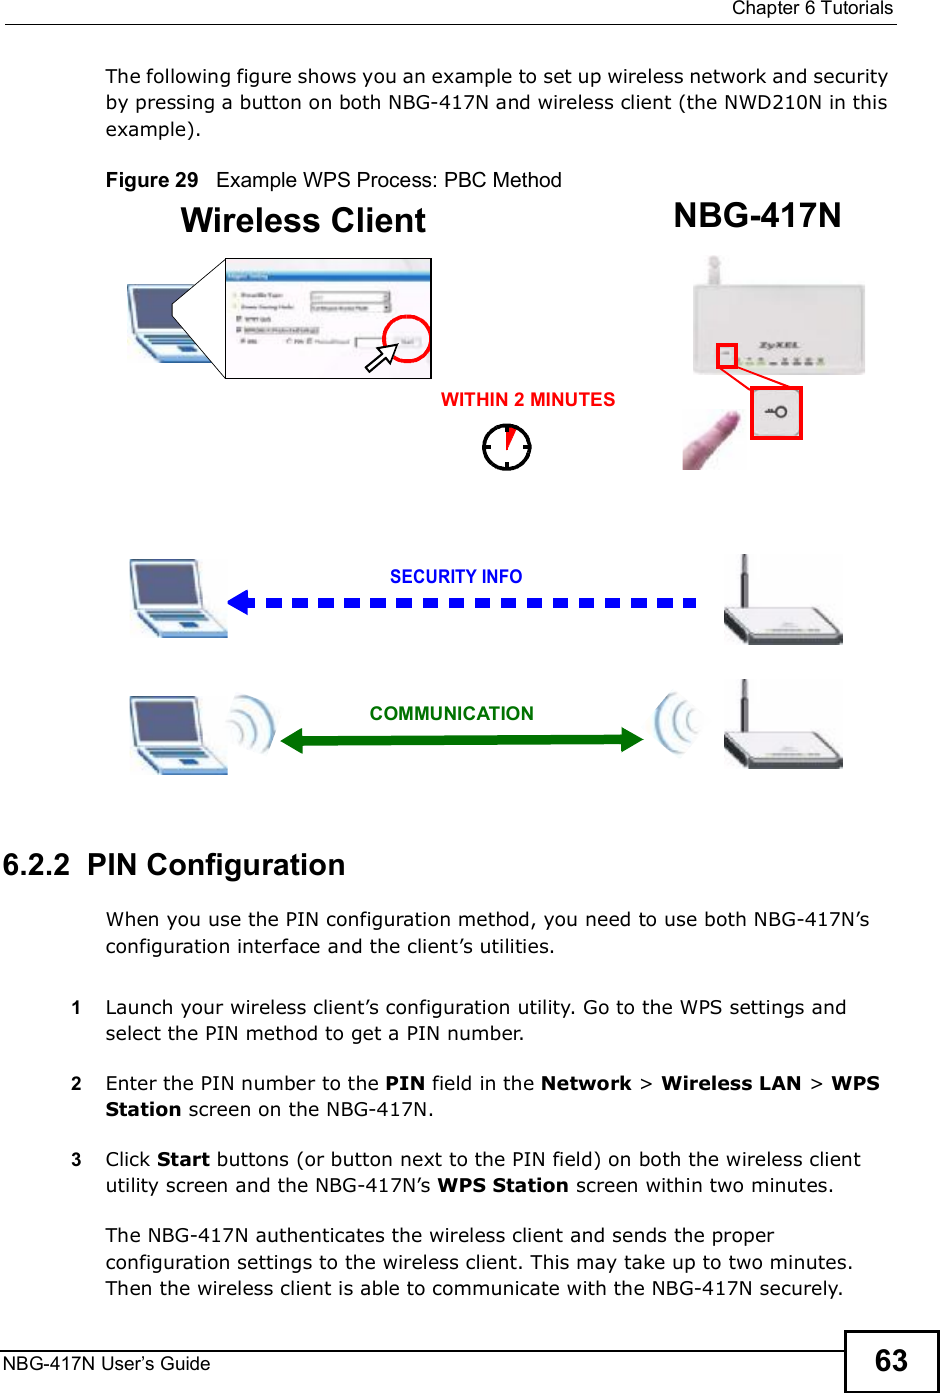  Chapter 6TutorialsNBG-417N User s Guide 63The following figure shows you an example to set up wireless network and security by pressing a button on both NBG-417N and wireless client (the NWD210N in this example).Figure 29   Example WPS Process: PBC Method6.2.2  PIN ConfigurationWhen you use the PIN configuration method, you need to use both NBG-417N!s configuration interface and the client!s utilities.1Launch your wireless client!s configuration utility. Go to the WPS settings and select the PIN method to get a PIN number.2Enter the PIN number to the PIN field in the Network &gt; Wireless LAN &gt; WPS Station screen on the NBG-417N.3Click Start buttons (or button next to the PIN field) on both the wireless client utility screen and the NBG-417N!s WPS Station screen within two minutes.The NBG-417N authenticates the wireless client and sends the proper configuration settings to the wireless client. This may take up to two minutes. Then the wireless client is able to communicate with the NBG-417N securely. Wireless Client    NBG-417NSECURITY INFOCOMMUNICATIONWITHIN 2 MINUTES